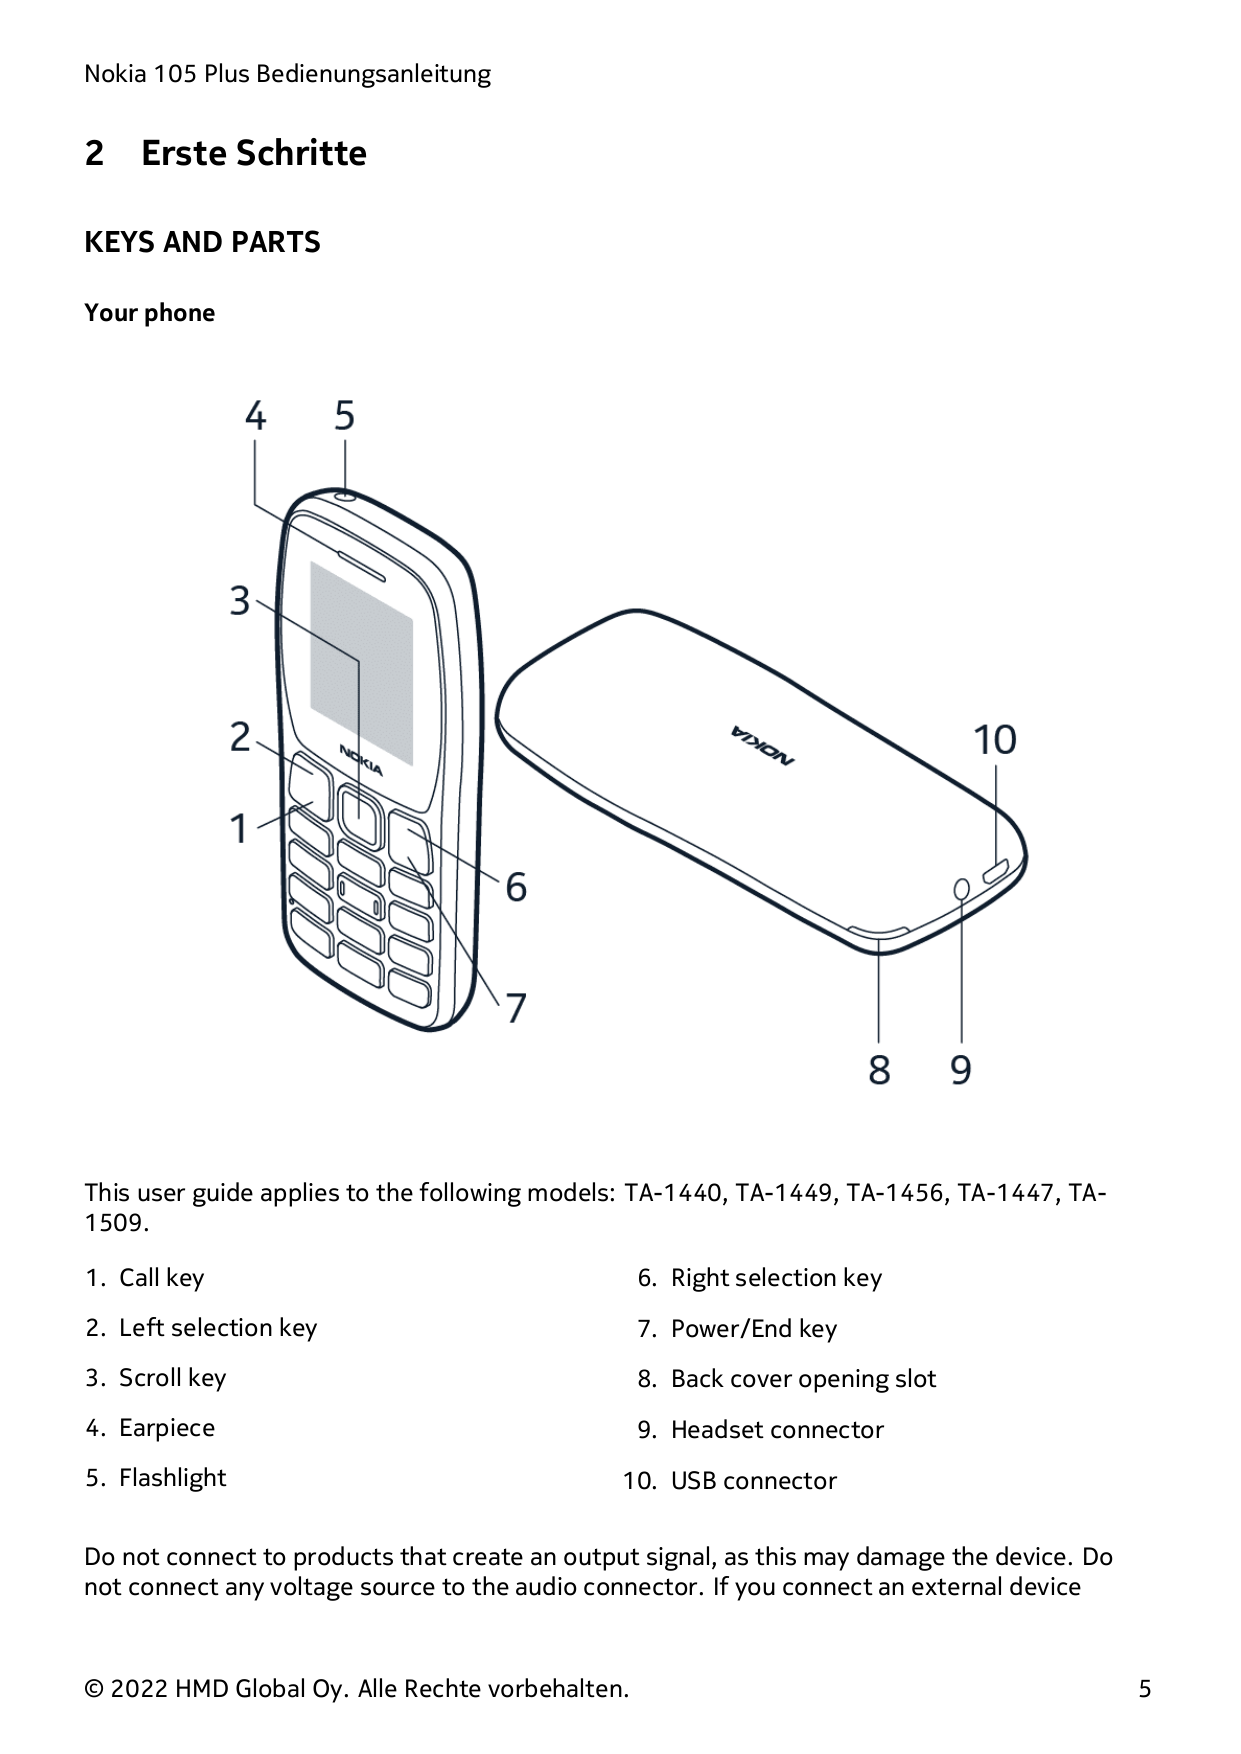 Nokia 105 Plus Bedienungsanleitung2Erste SchritteKEYS AND PARTSYour phoneThis user guide applies to the following models: TA-144